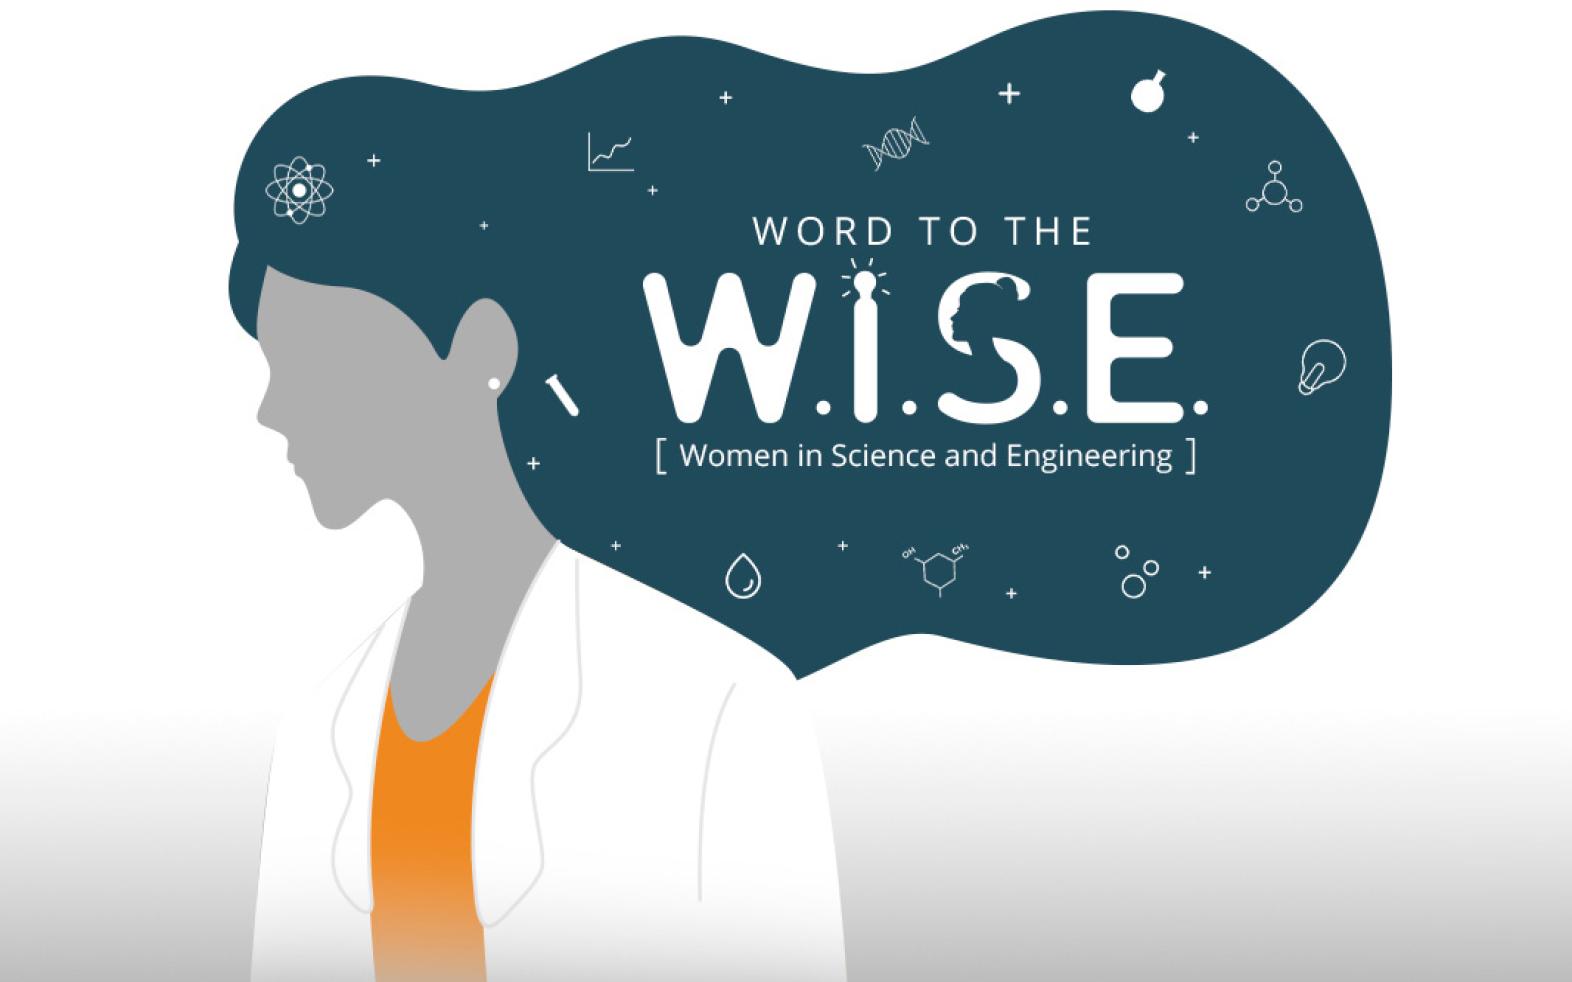 Word to the W.I.S.E. (Women in Science and Engineering) podcast series